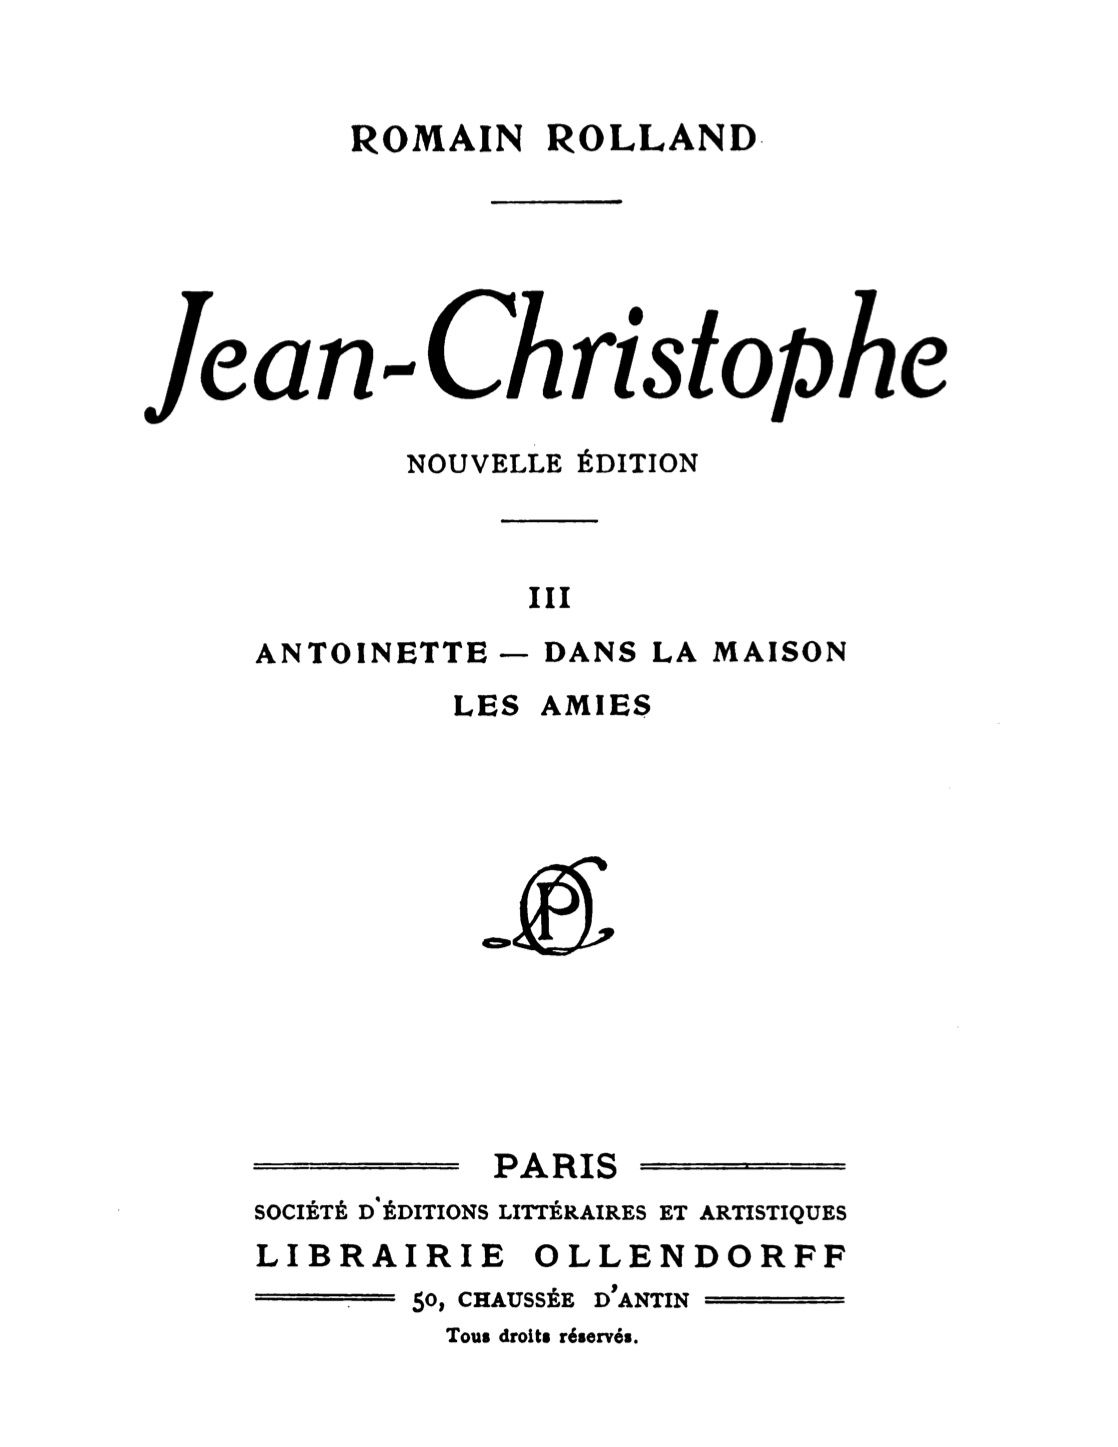 The Project Gutenberg eBook of Jean-Christophe Volume 3 (of 4), by Romain  Rolland.